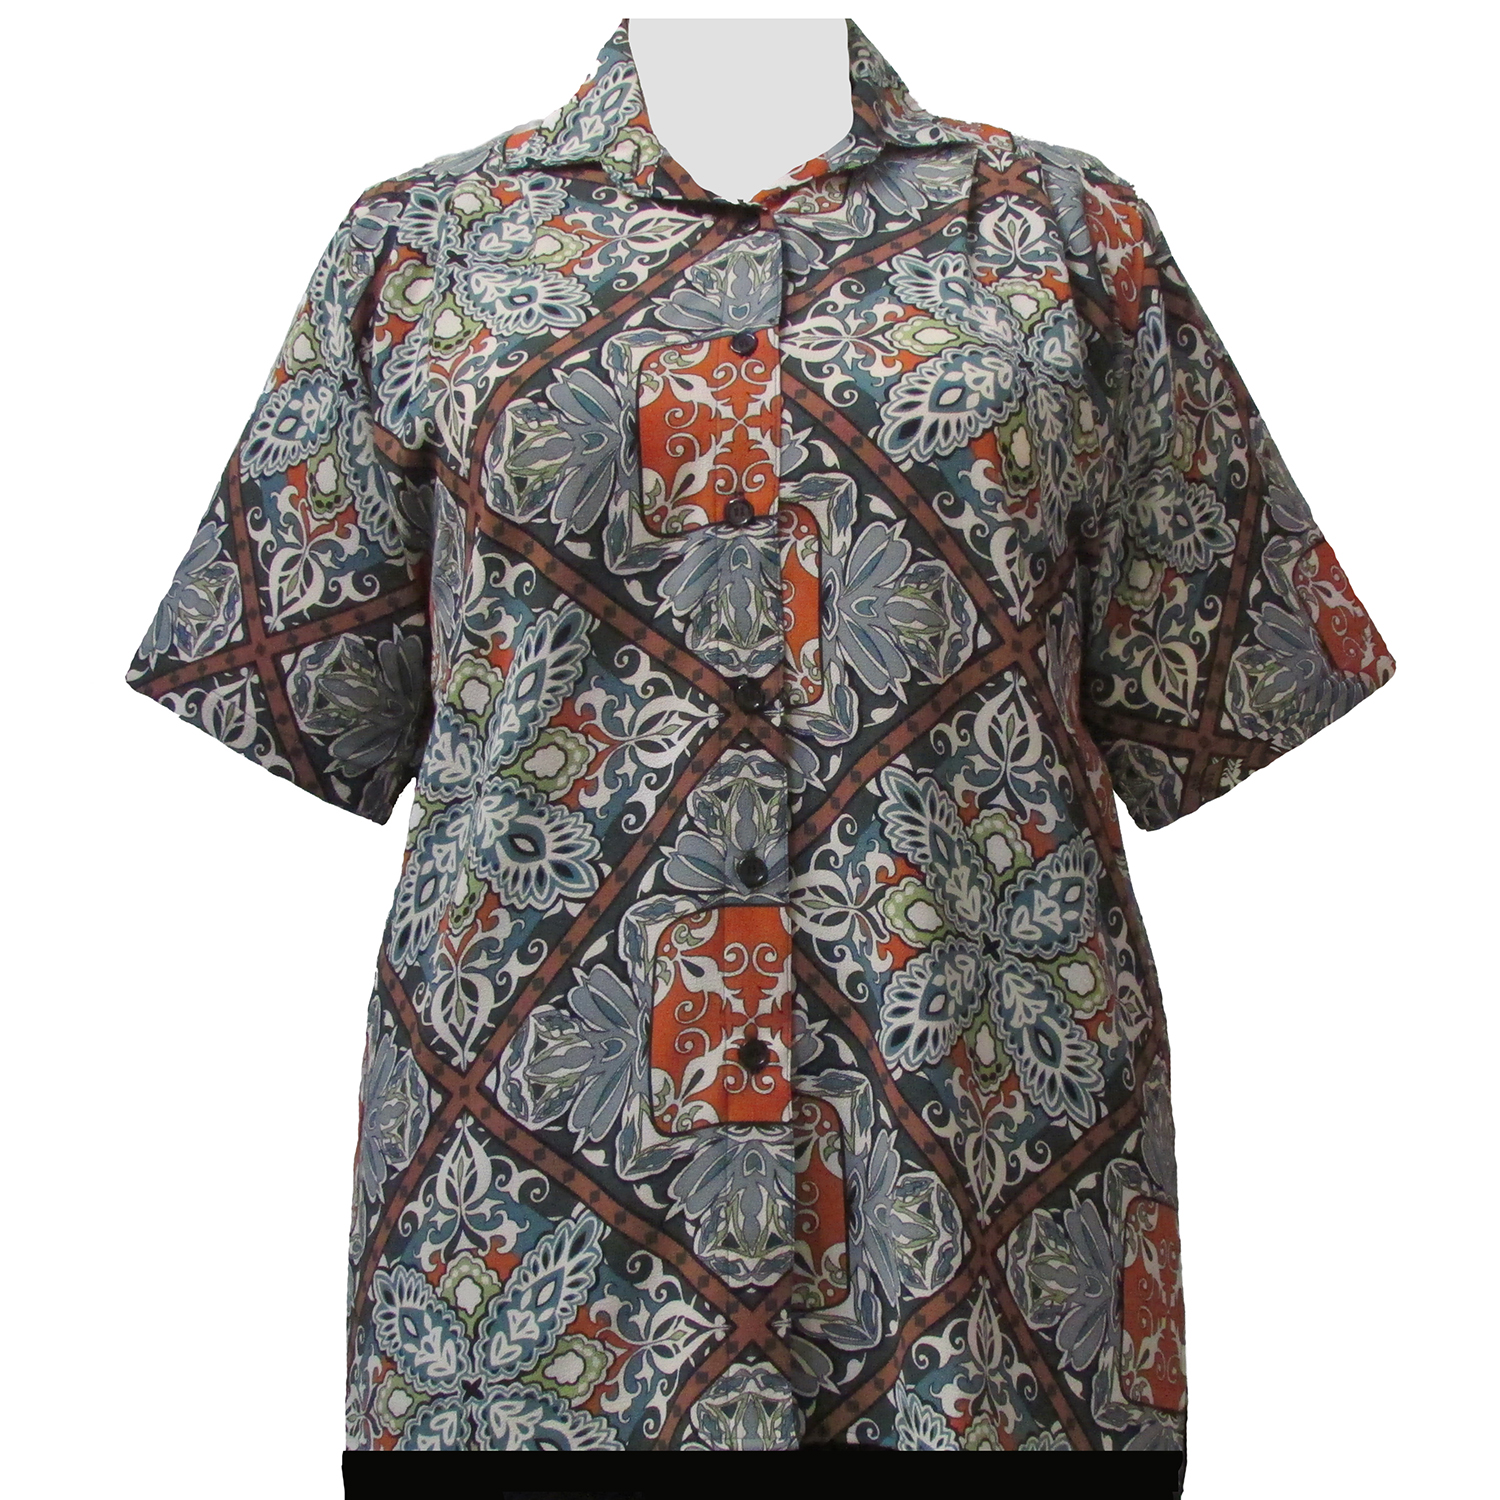 A Personal Touch Green Tapestry Short Sleeve Tunic Plus Size Women's Blouse